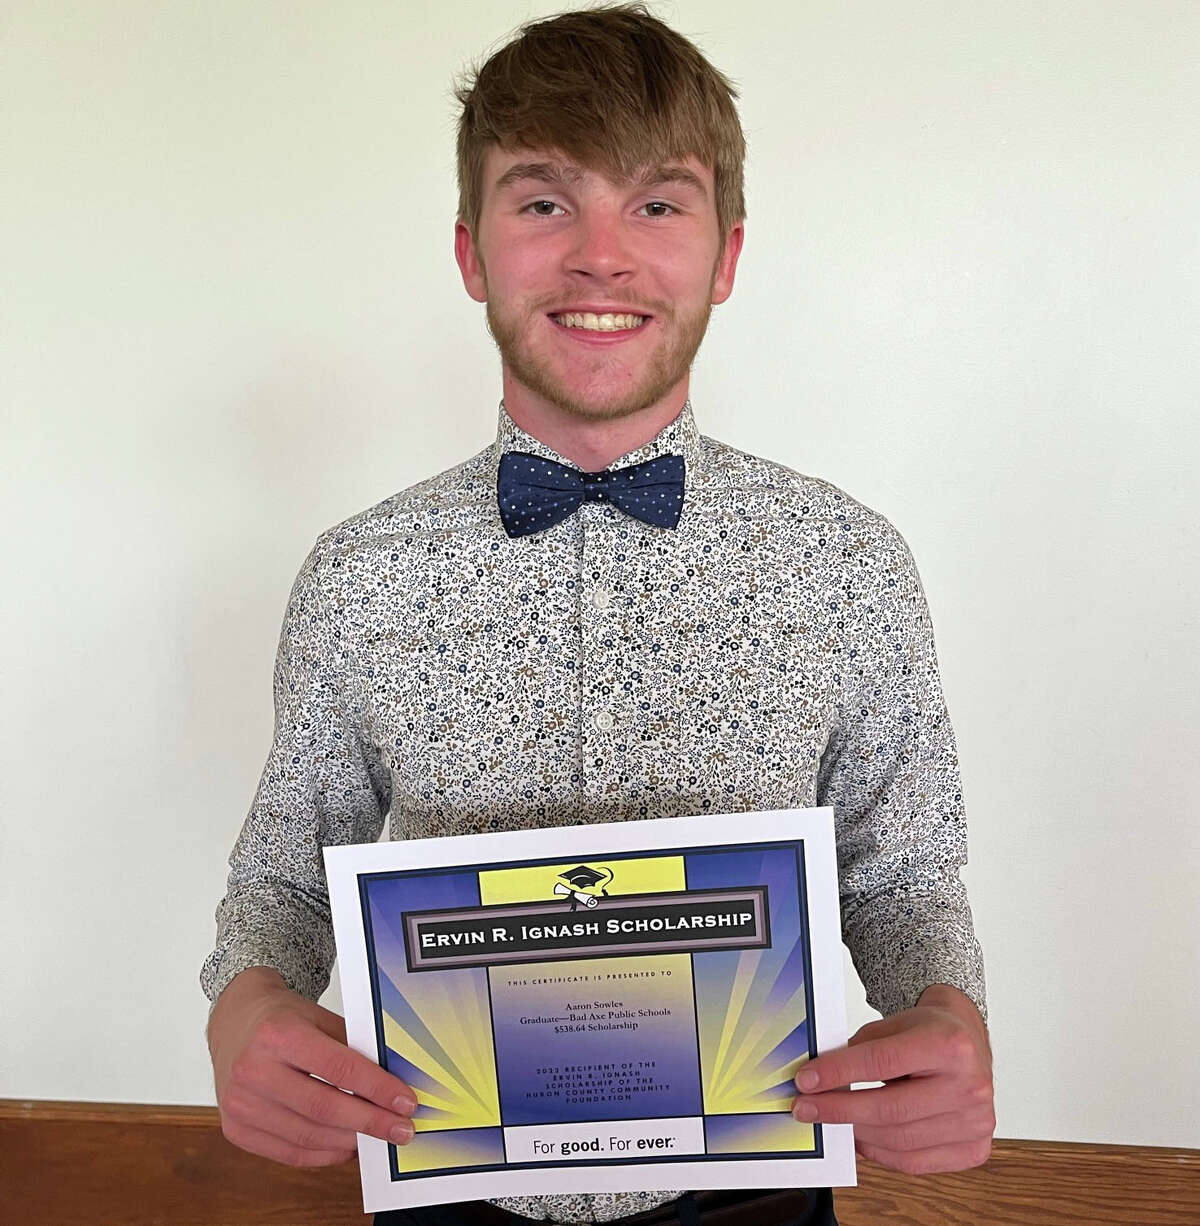 The Huron County Community Foundation recently awarded more than $117,000 in scholarships to members of the Class of 2022 so they can further education after graduation. Aaron Sowles of Bad Axe received the Ervin R. Ignash Scholarship.